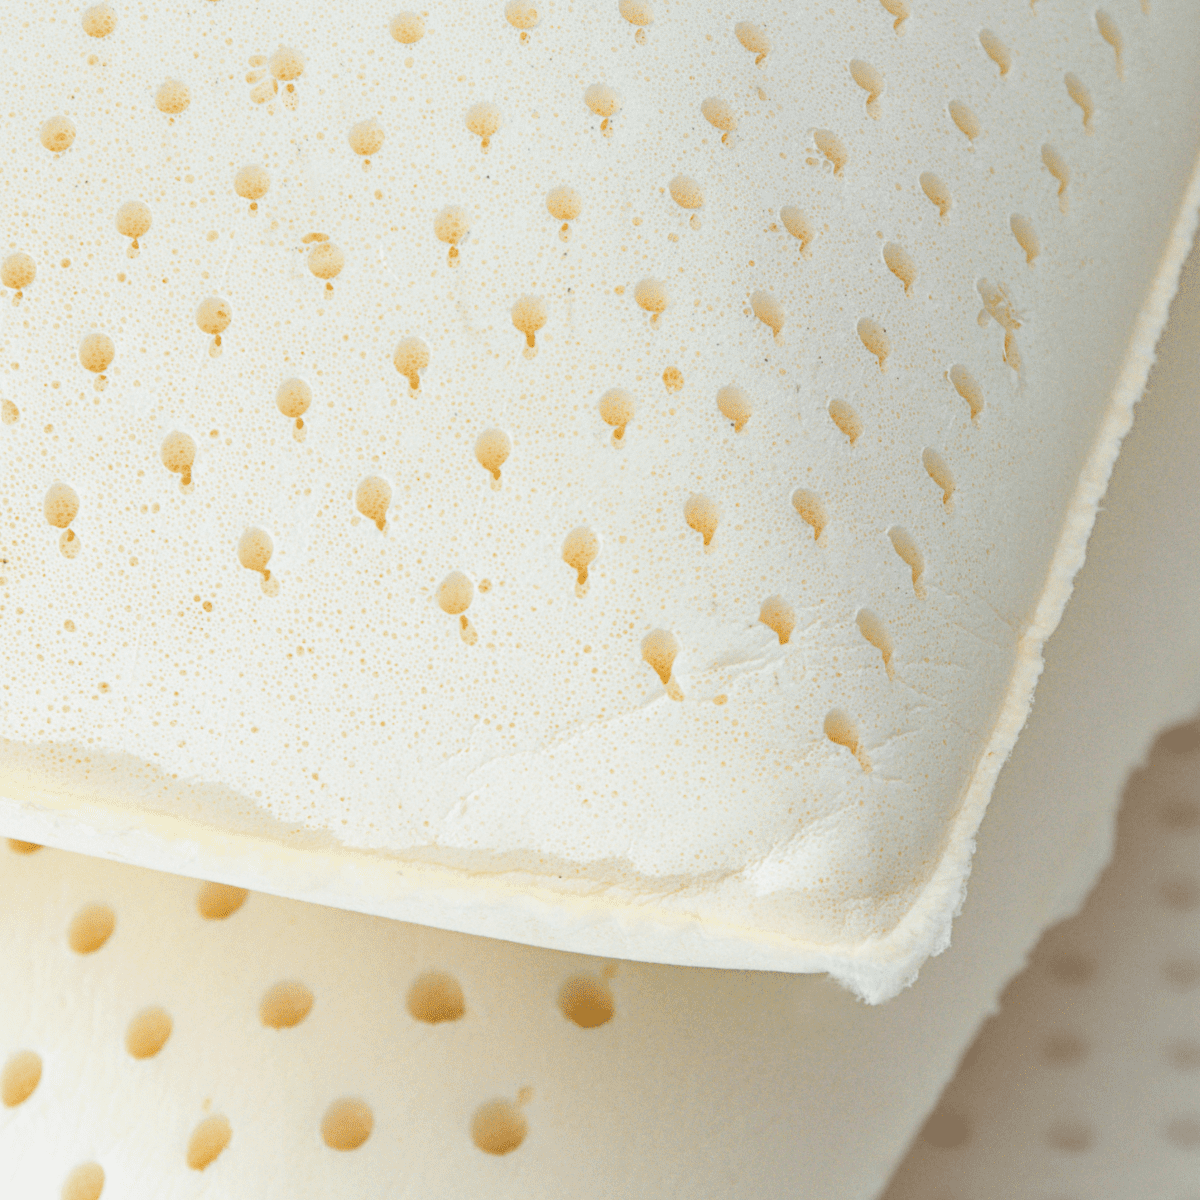 How to Dry Memory Foam and Latex Pillows